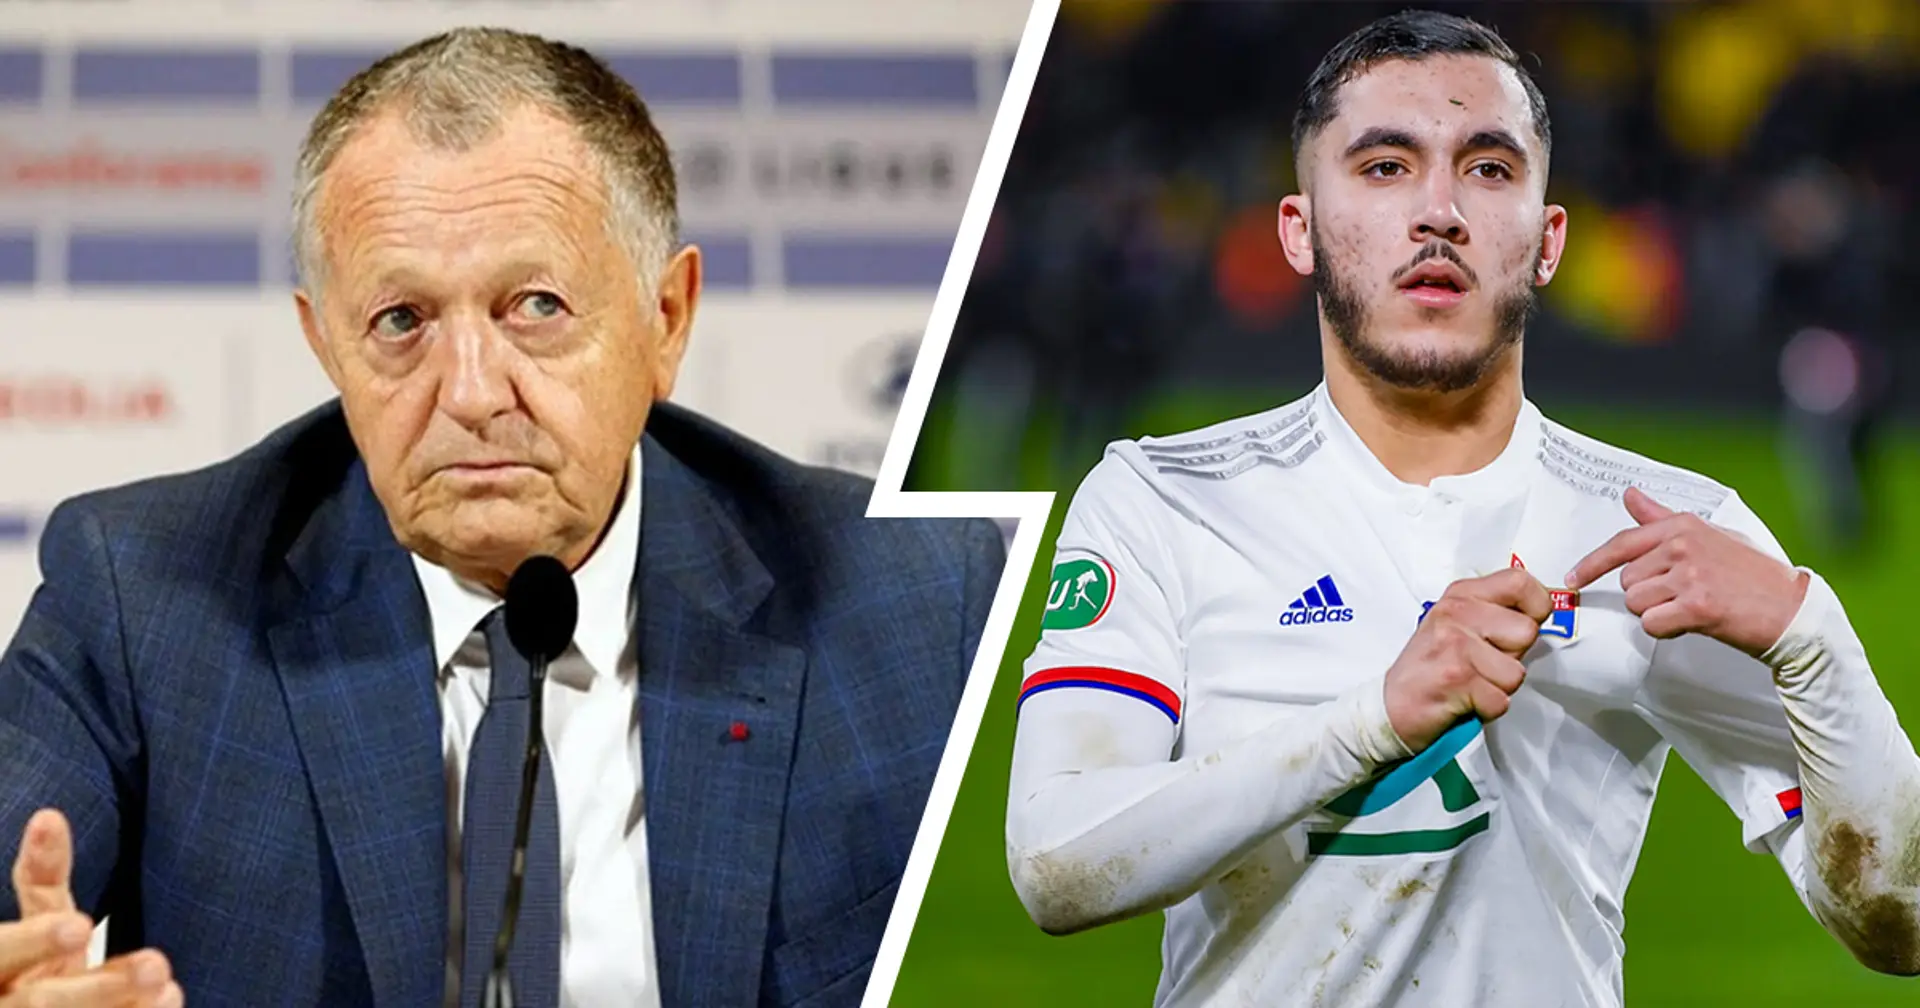 Lyon president Jean-Michel Aulas confirms Real Madrid's interest in 16-year-old prodigy Rayan Cherki